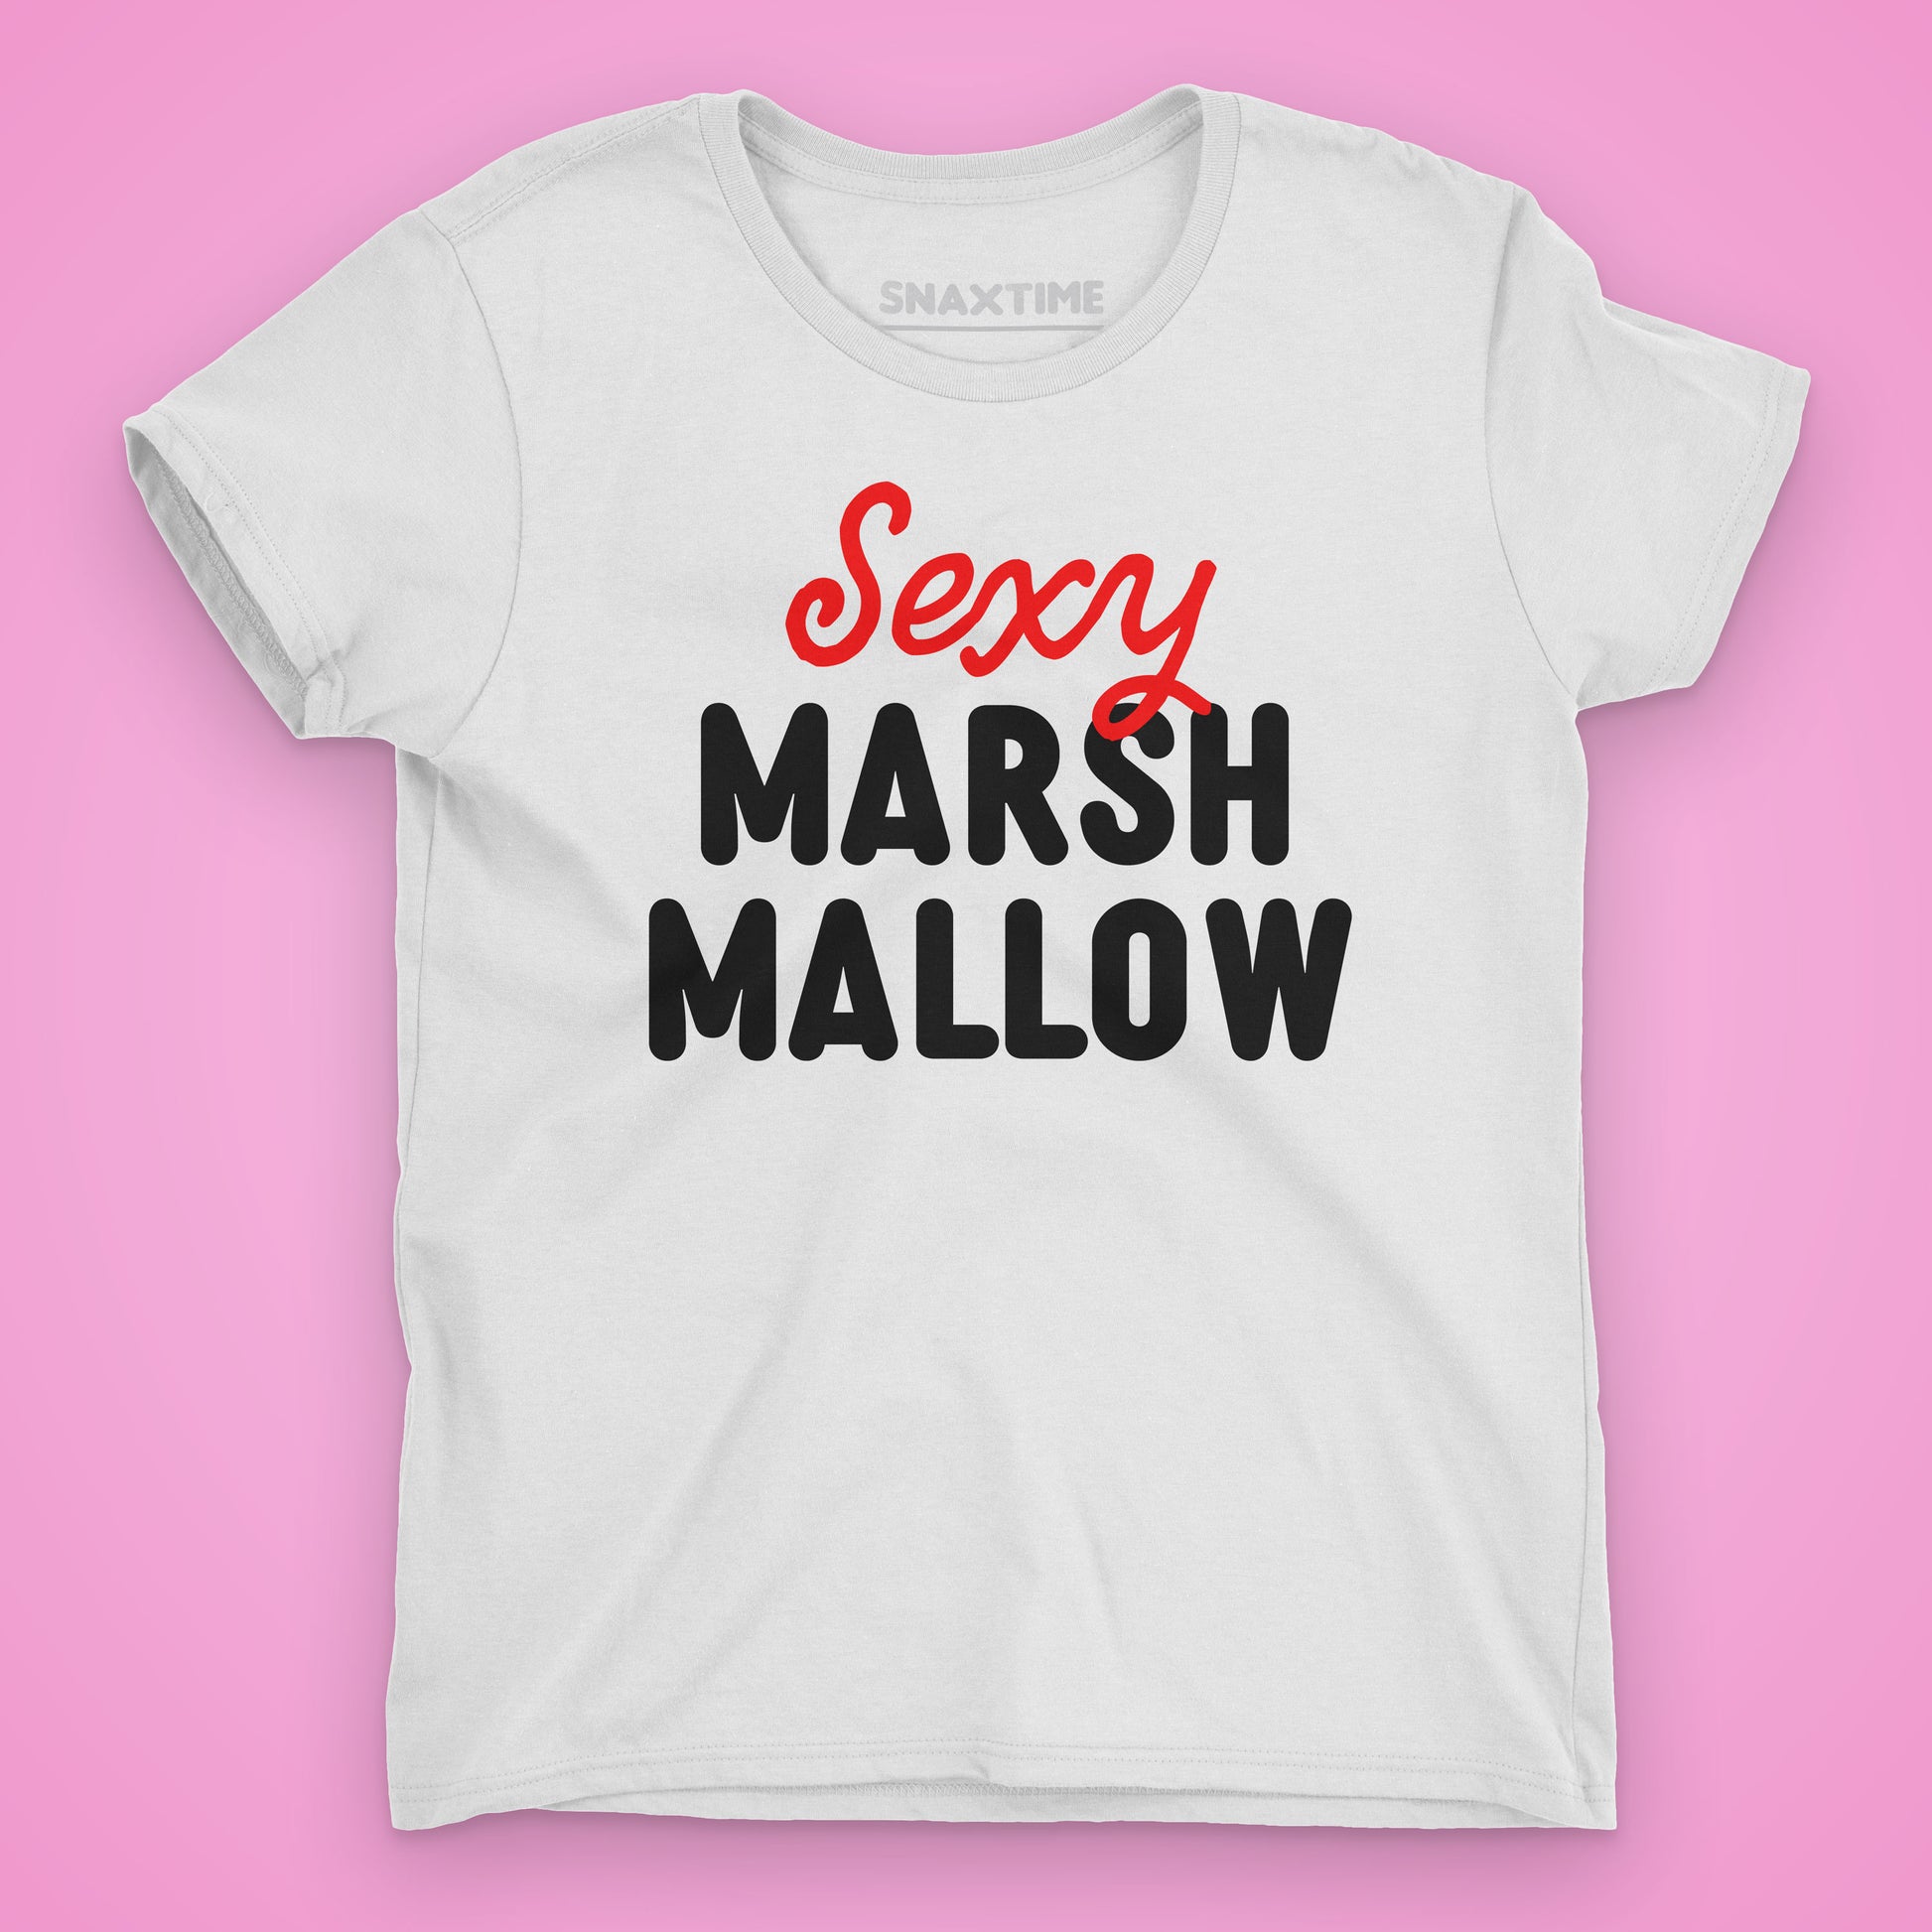  Sexy Marshmallow Halloween Costume Women's Graphic T-Shirt by Snaxtime